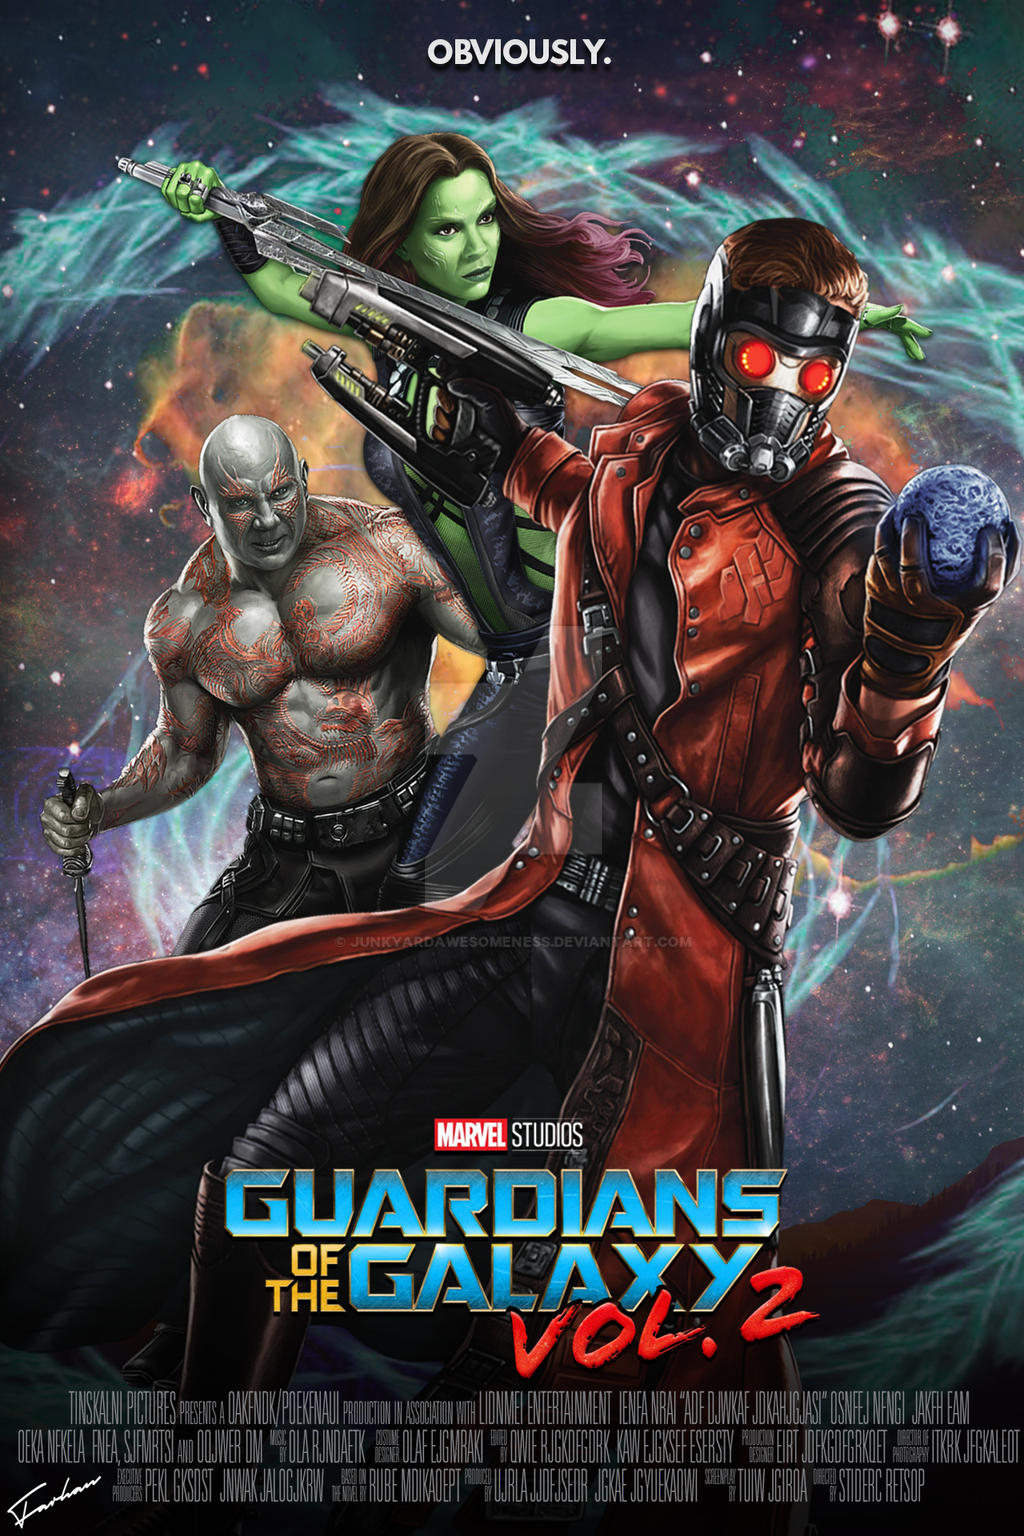 Guardians Of The Galaxy Vol 2 2017 Movie Poster 24x36 Borderless Glossy  17073